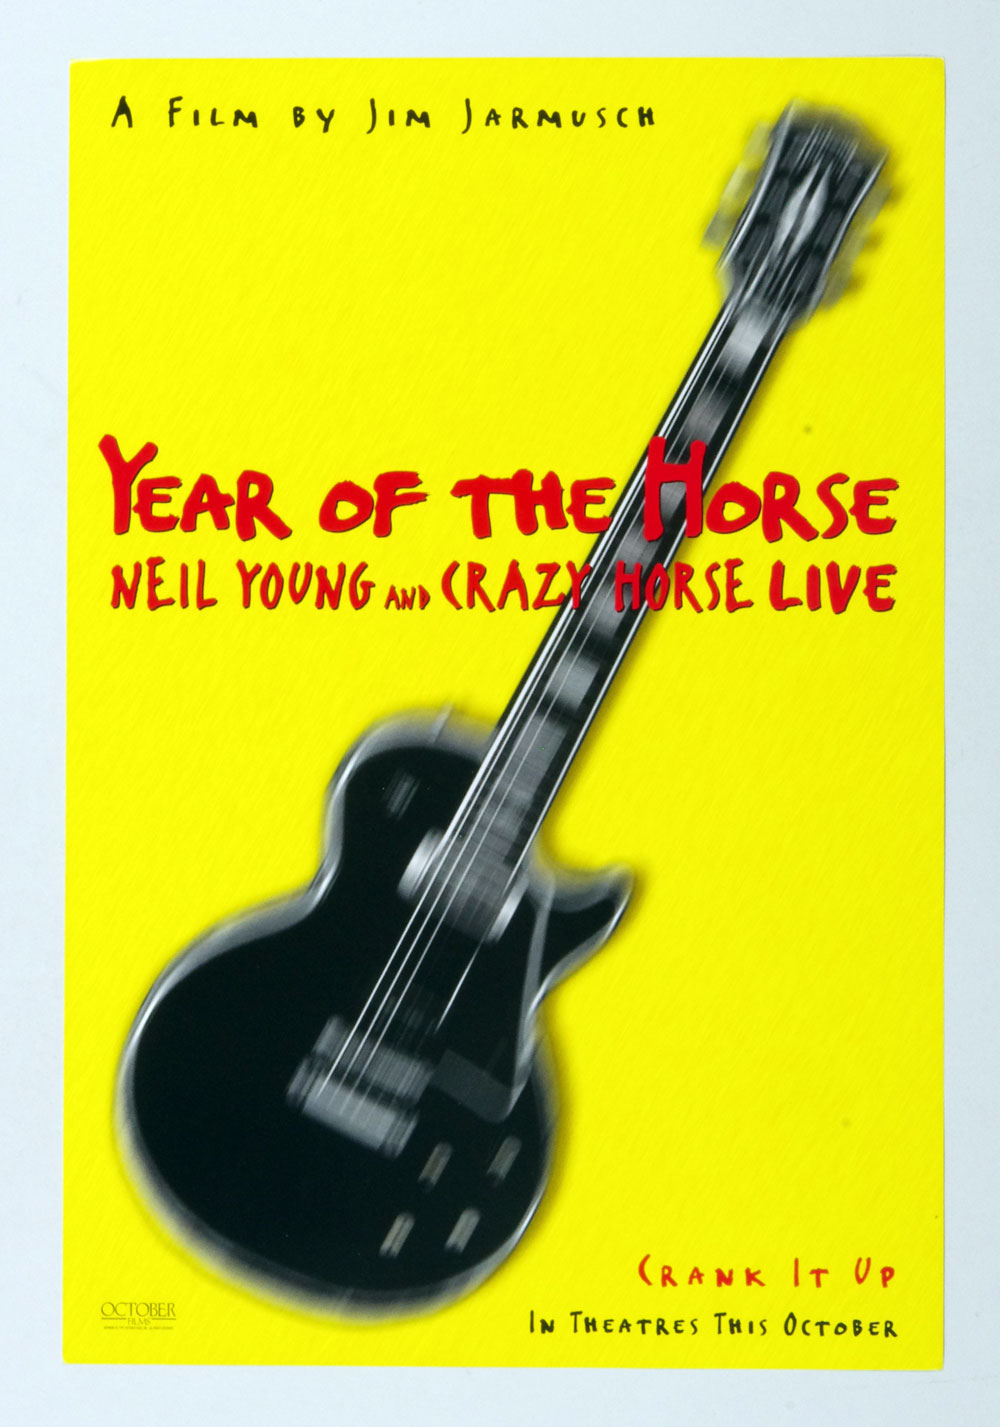 Neil Young Poster 1977 Year of the Horse Film Promotion